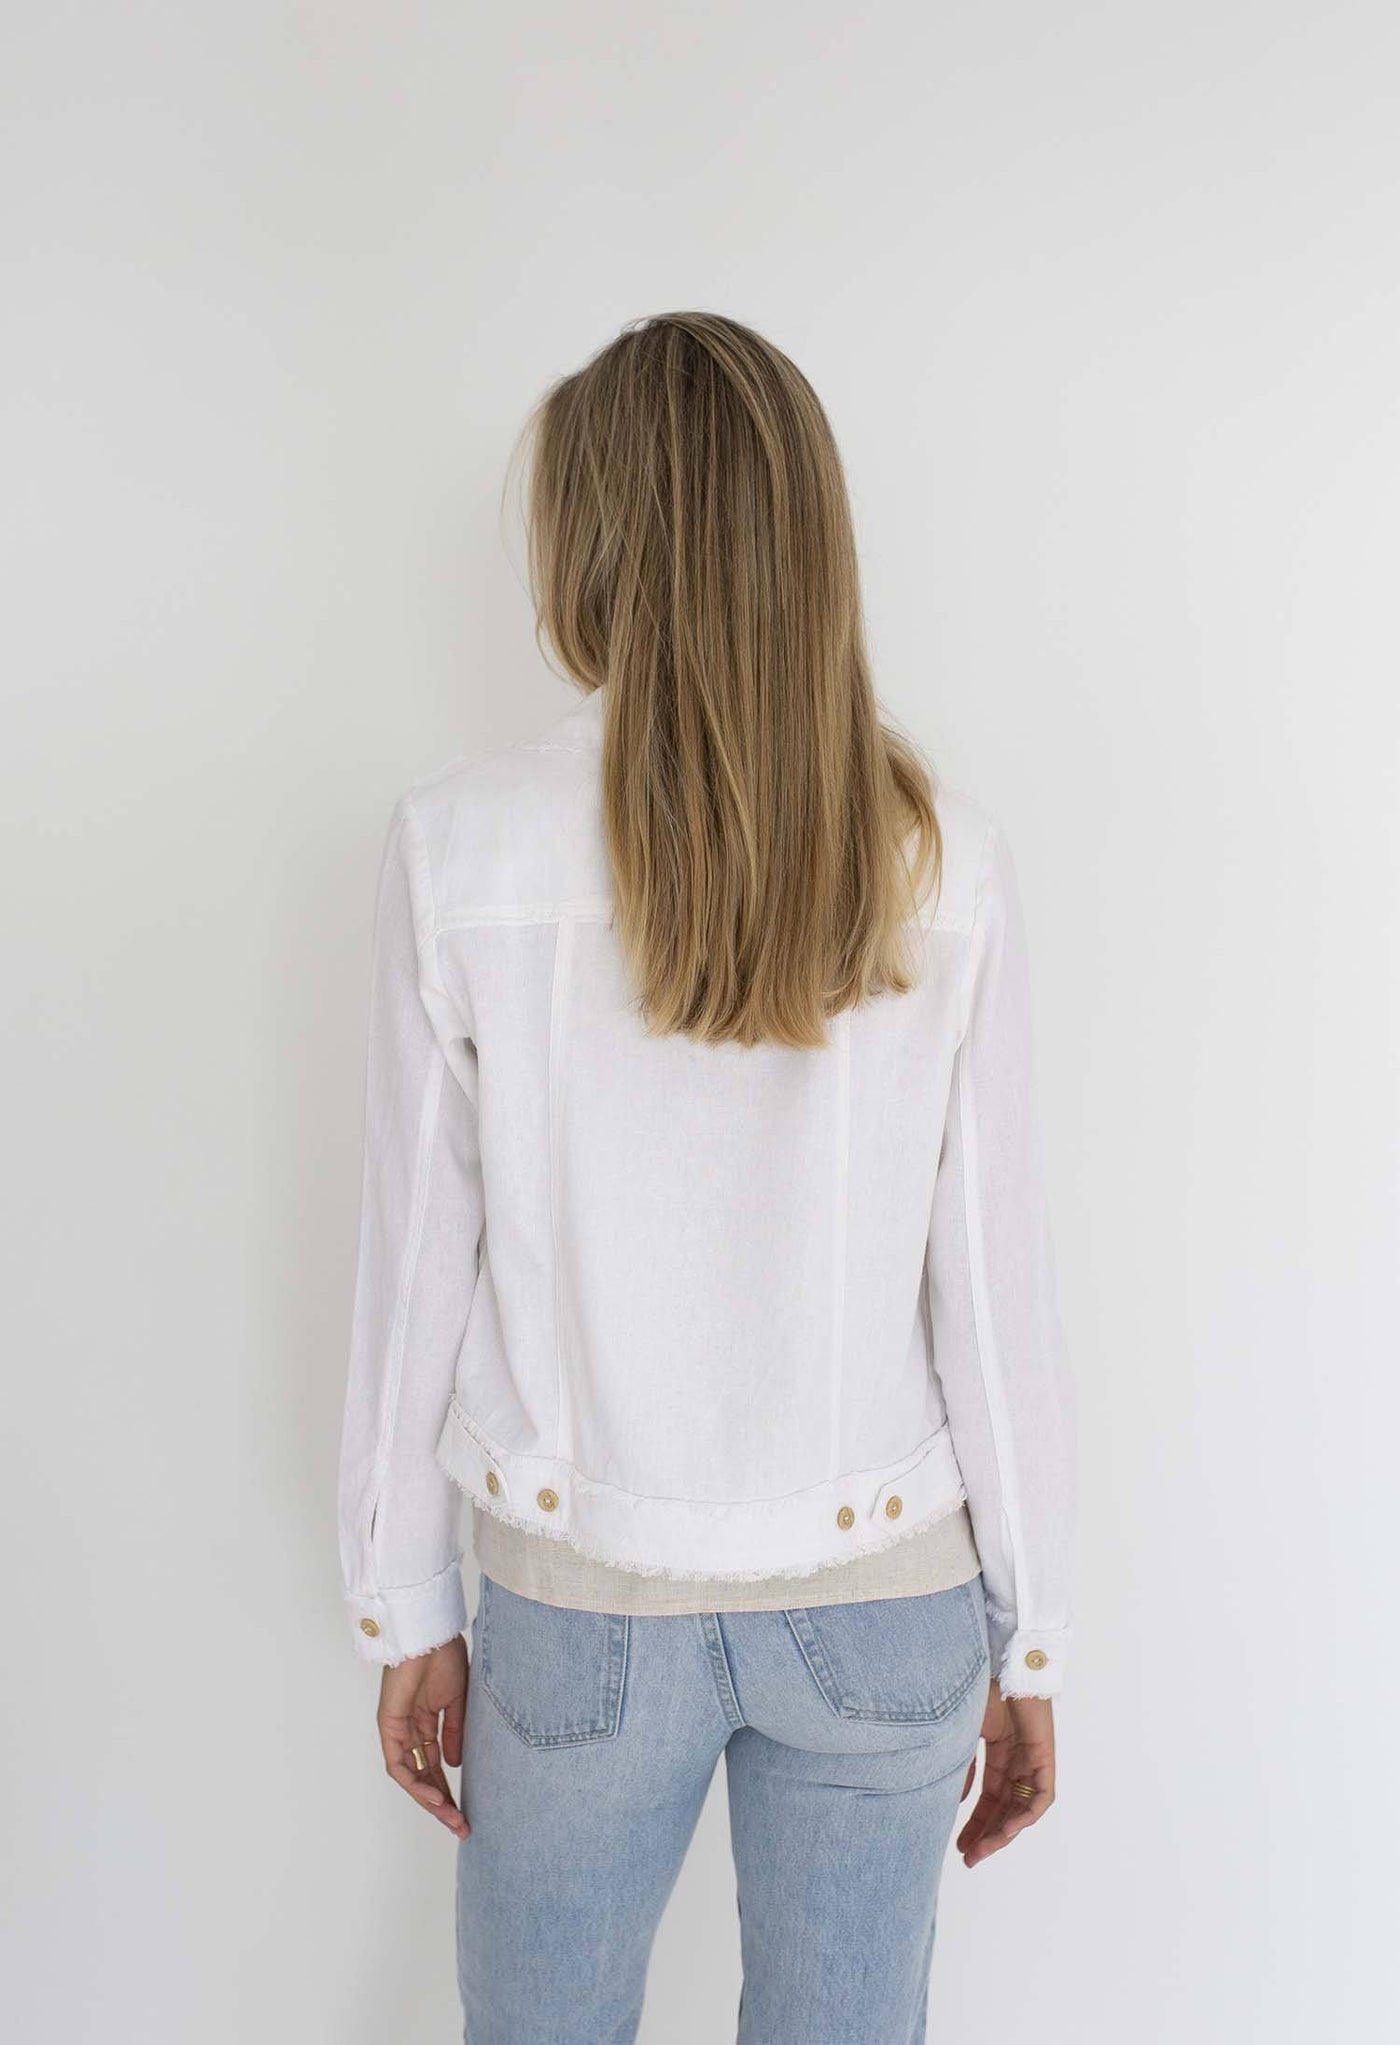 White Linen Viscose Jacket with Fringe detailing front view 